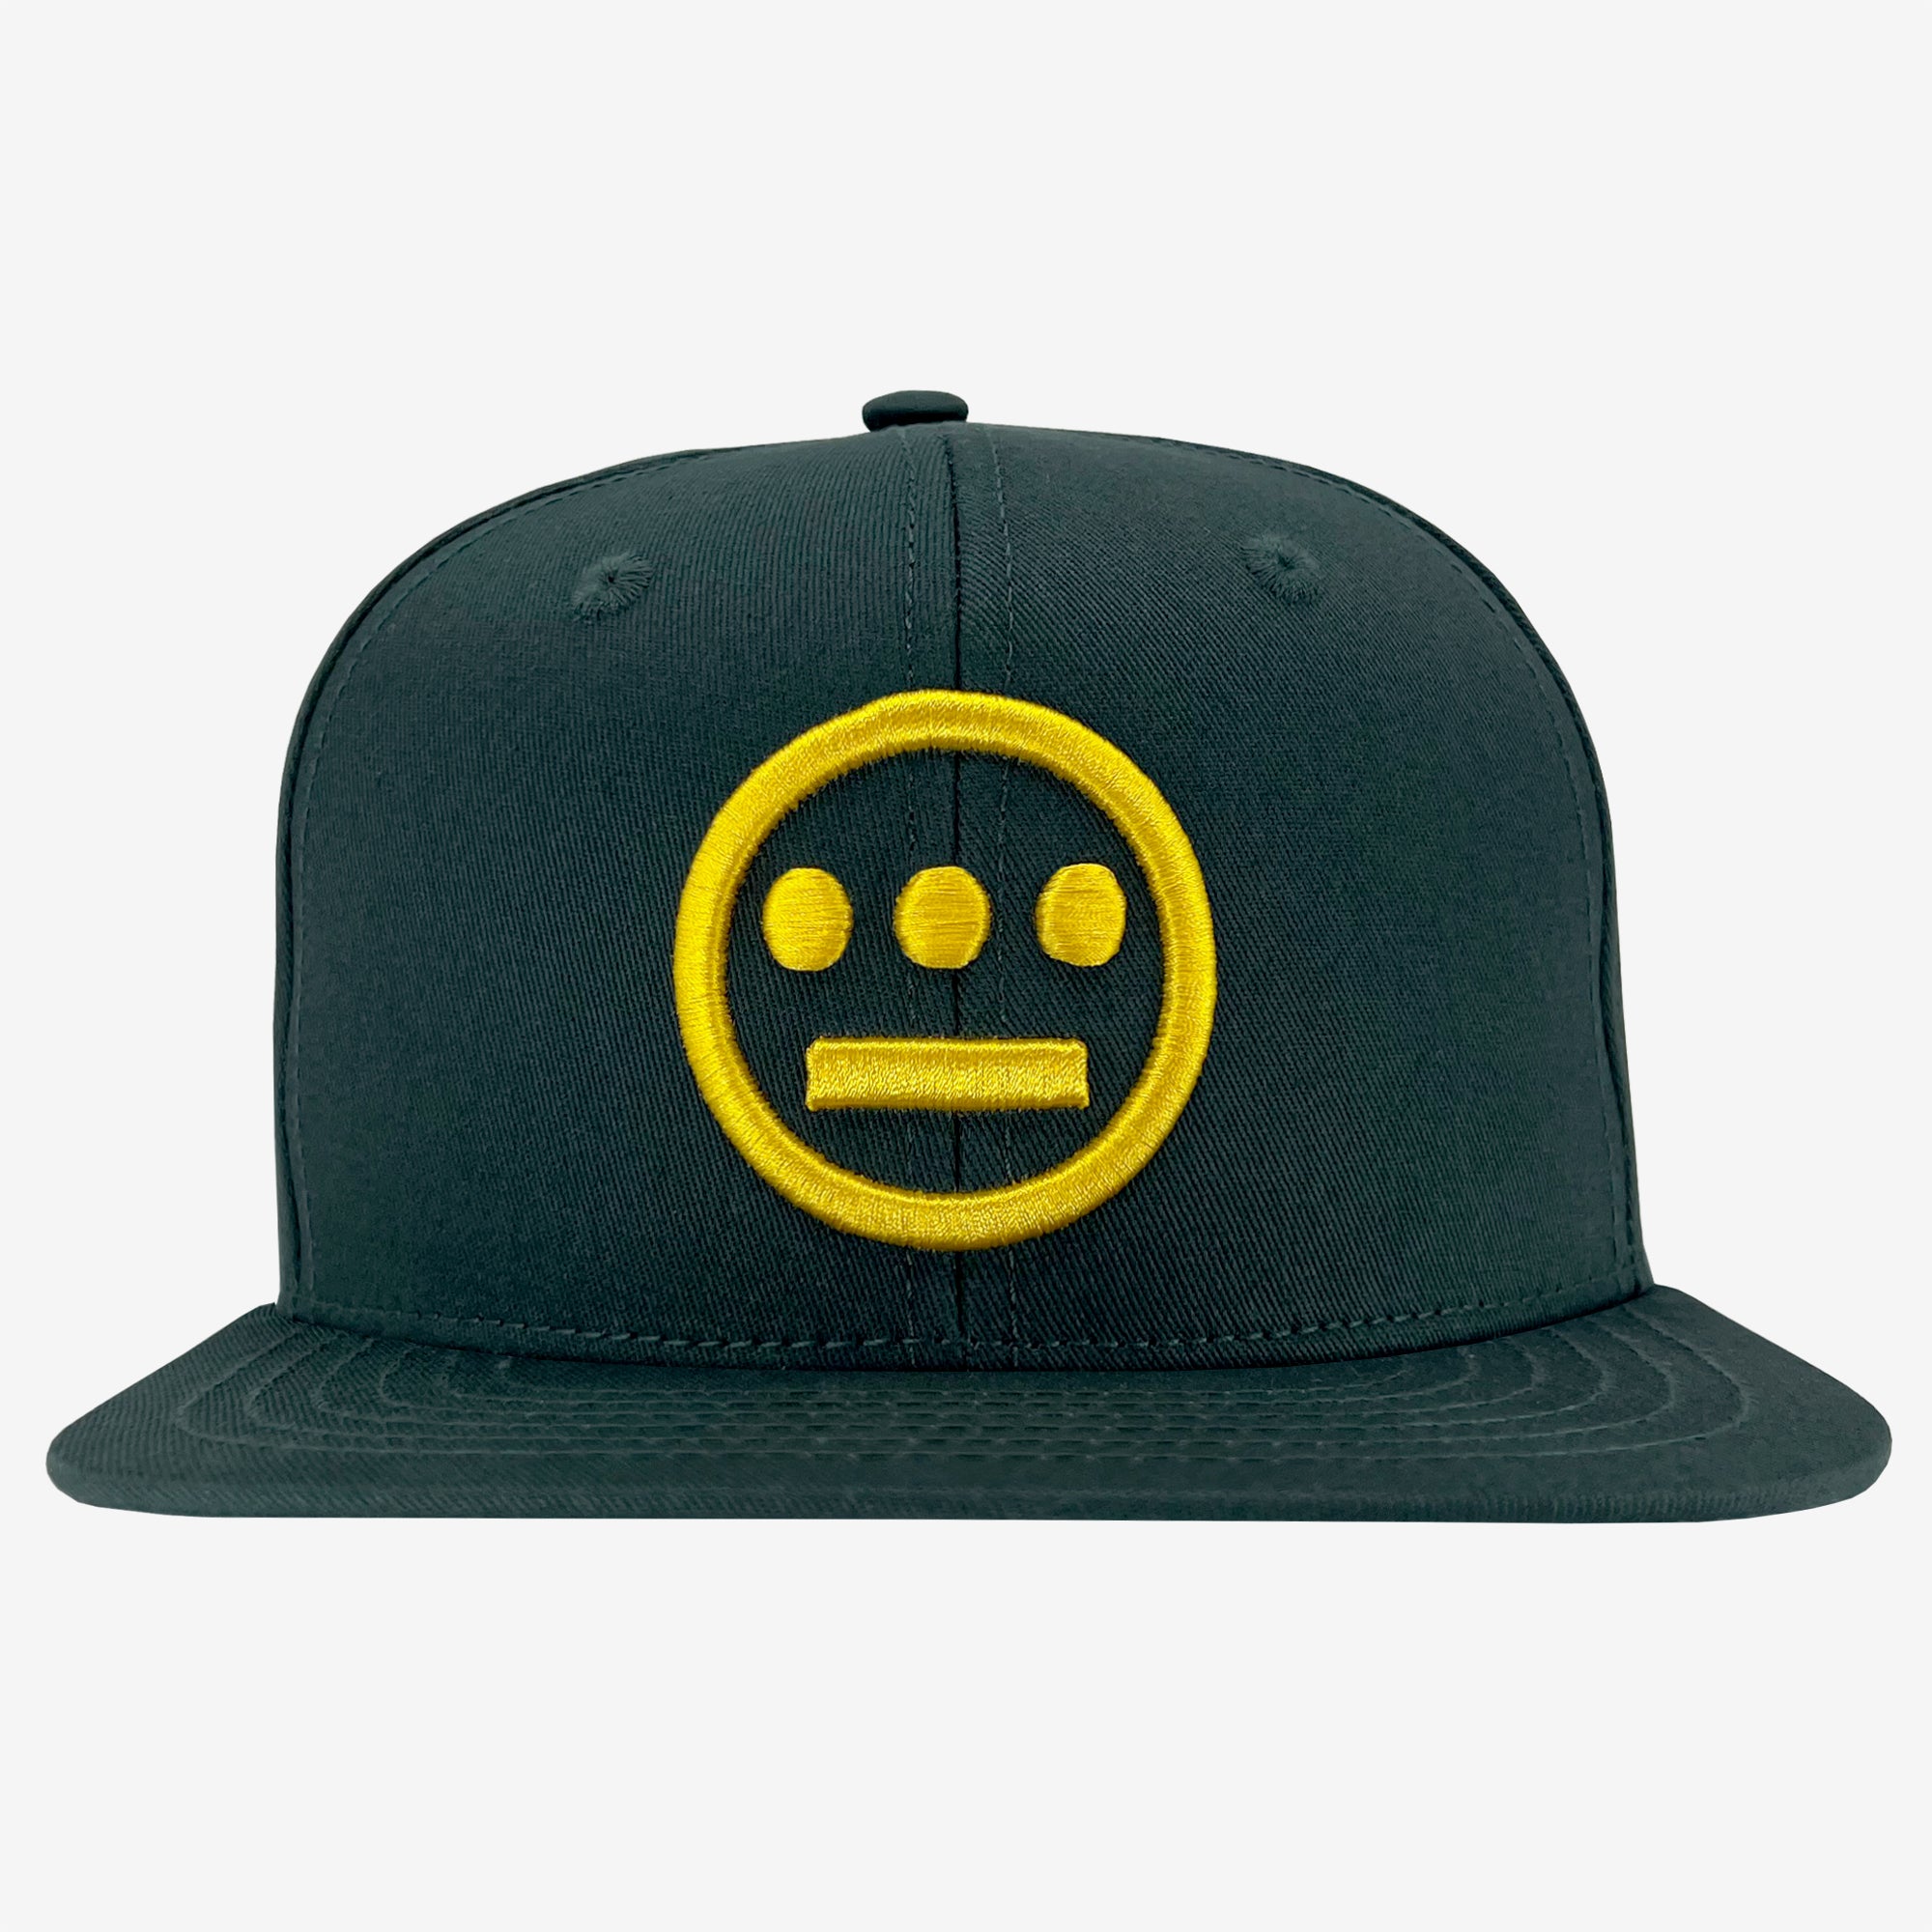 Green cap with embroidered gold Hieroglyphics hip-hop logo on the crown. 